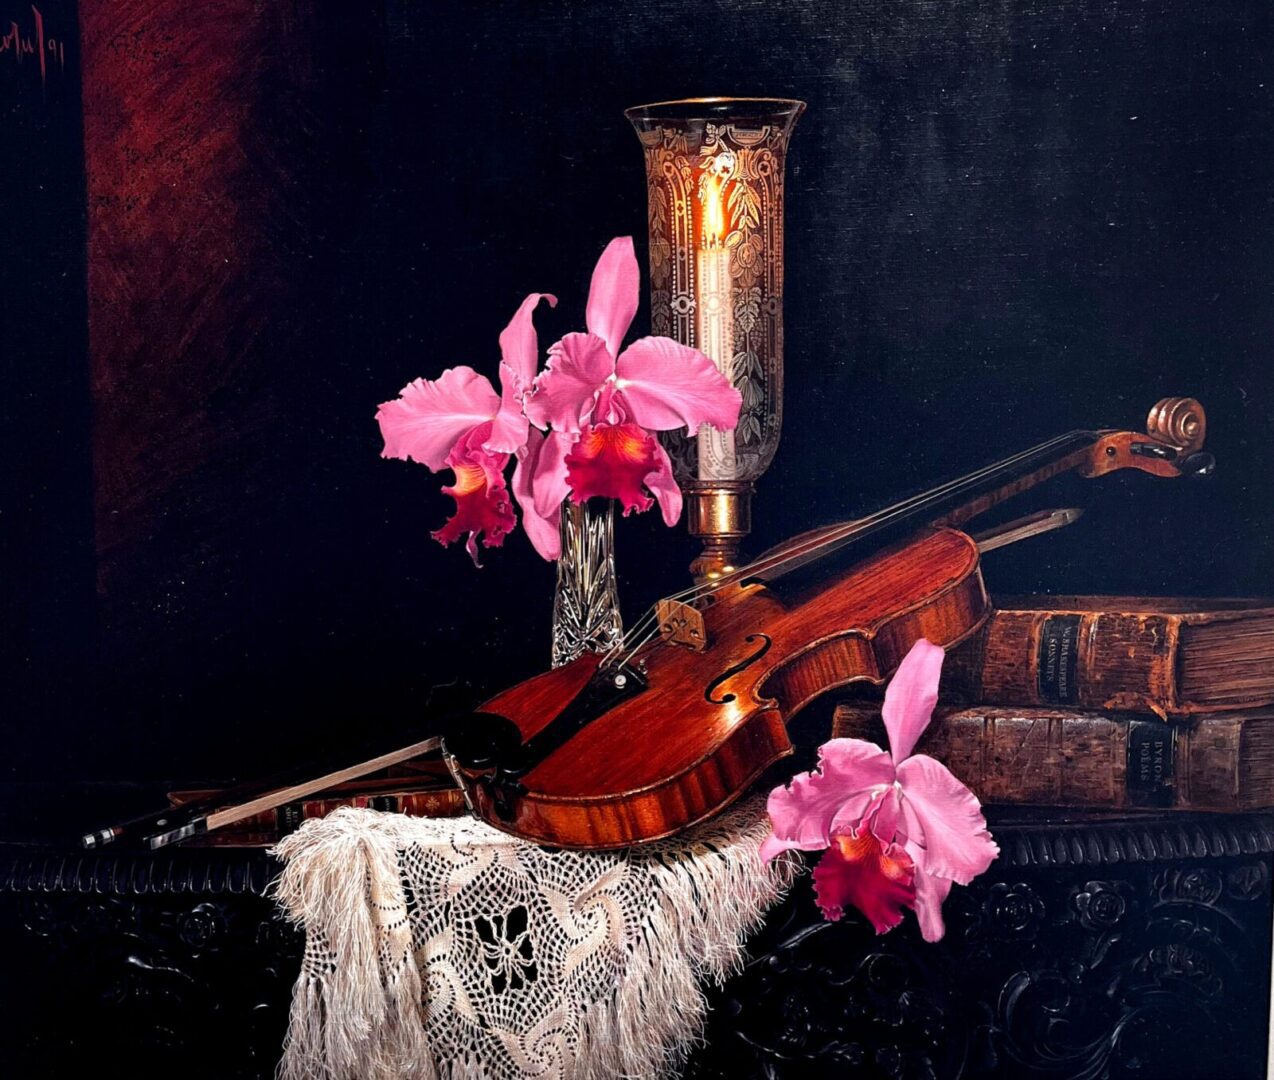 A painting of a violin and flowers on a table.